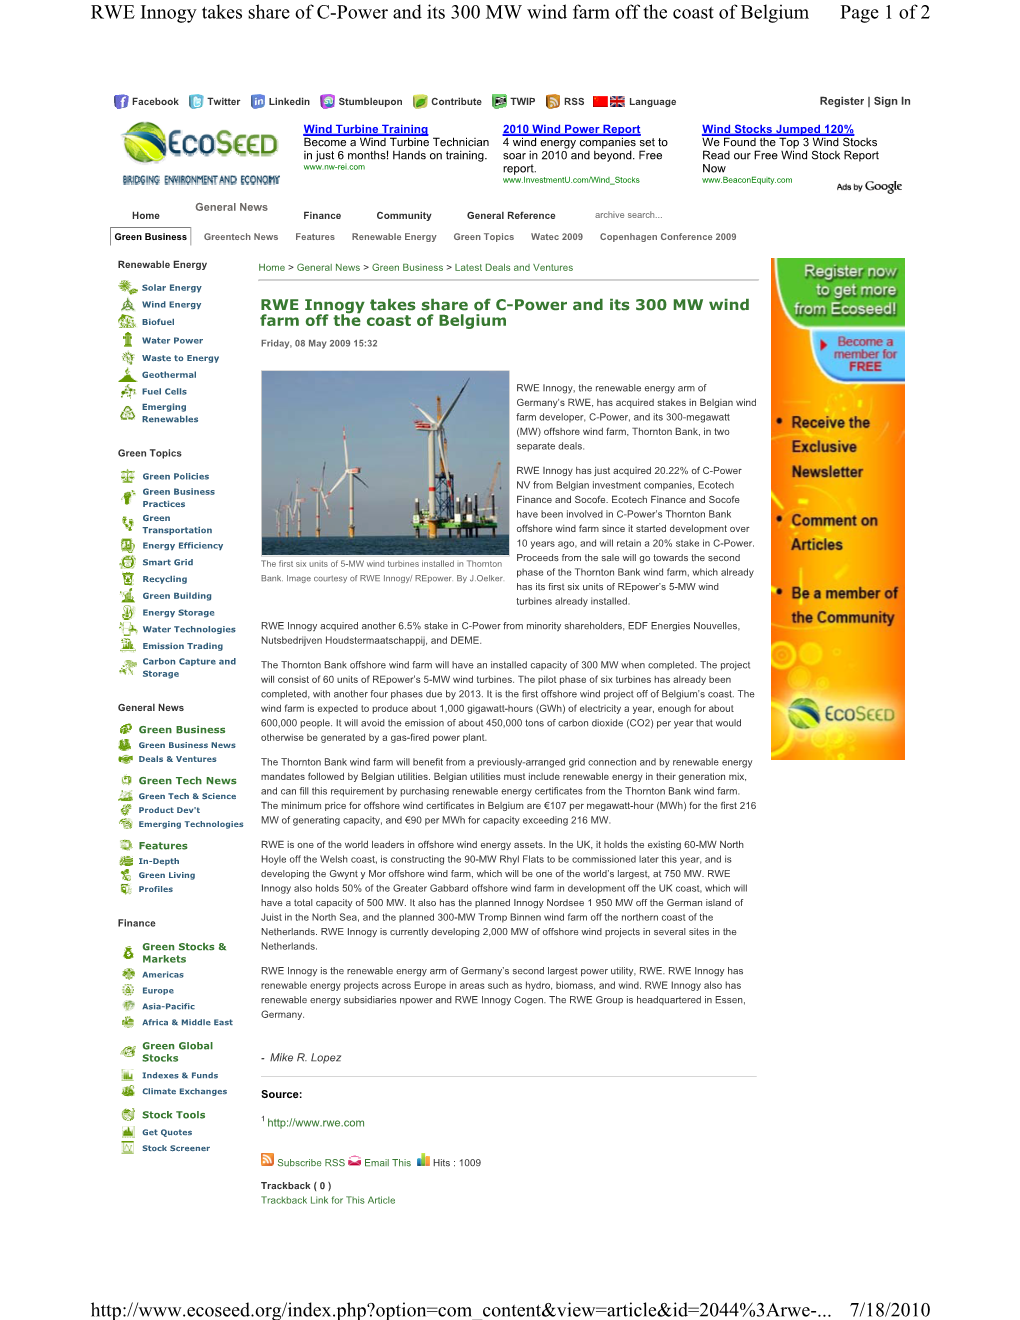 Page 1 of 2 RWE Innogy Takes Share of C-Power and Its 300 MW Wind